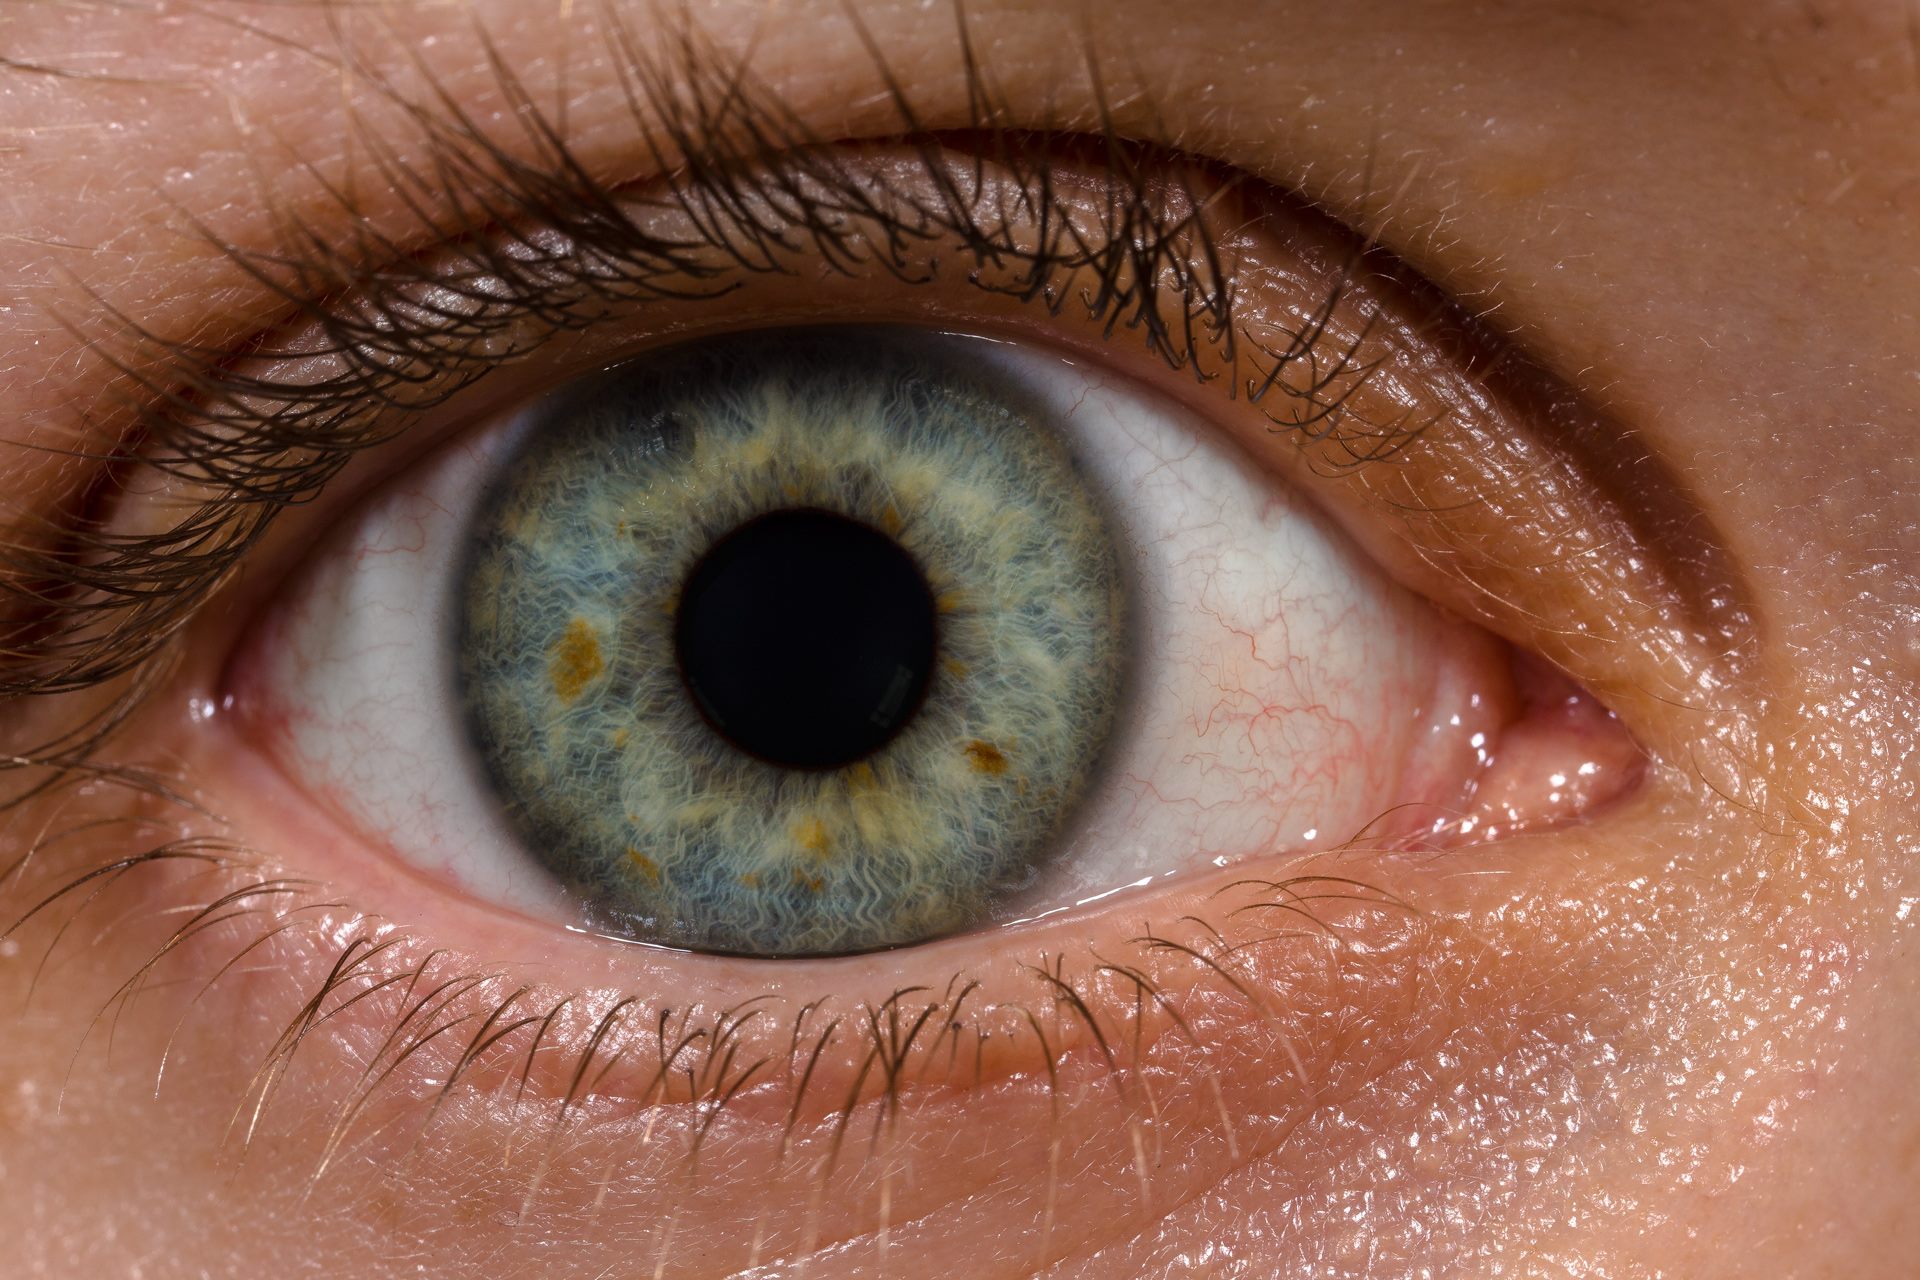 How many eyes does a human eye have?